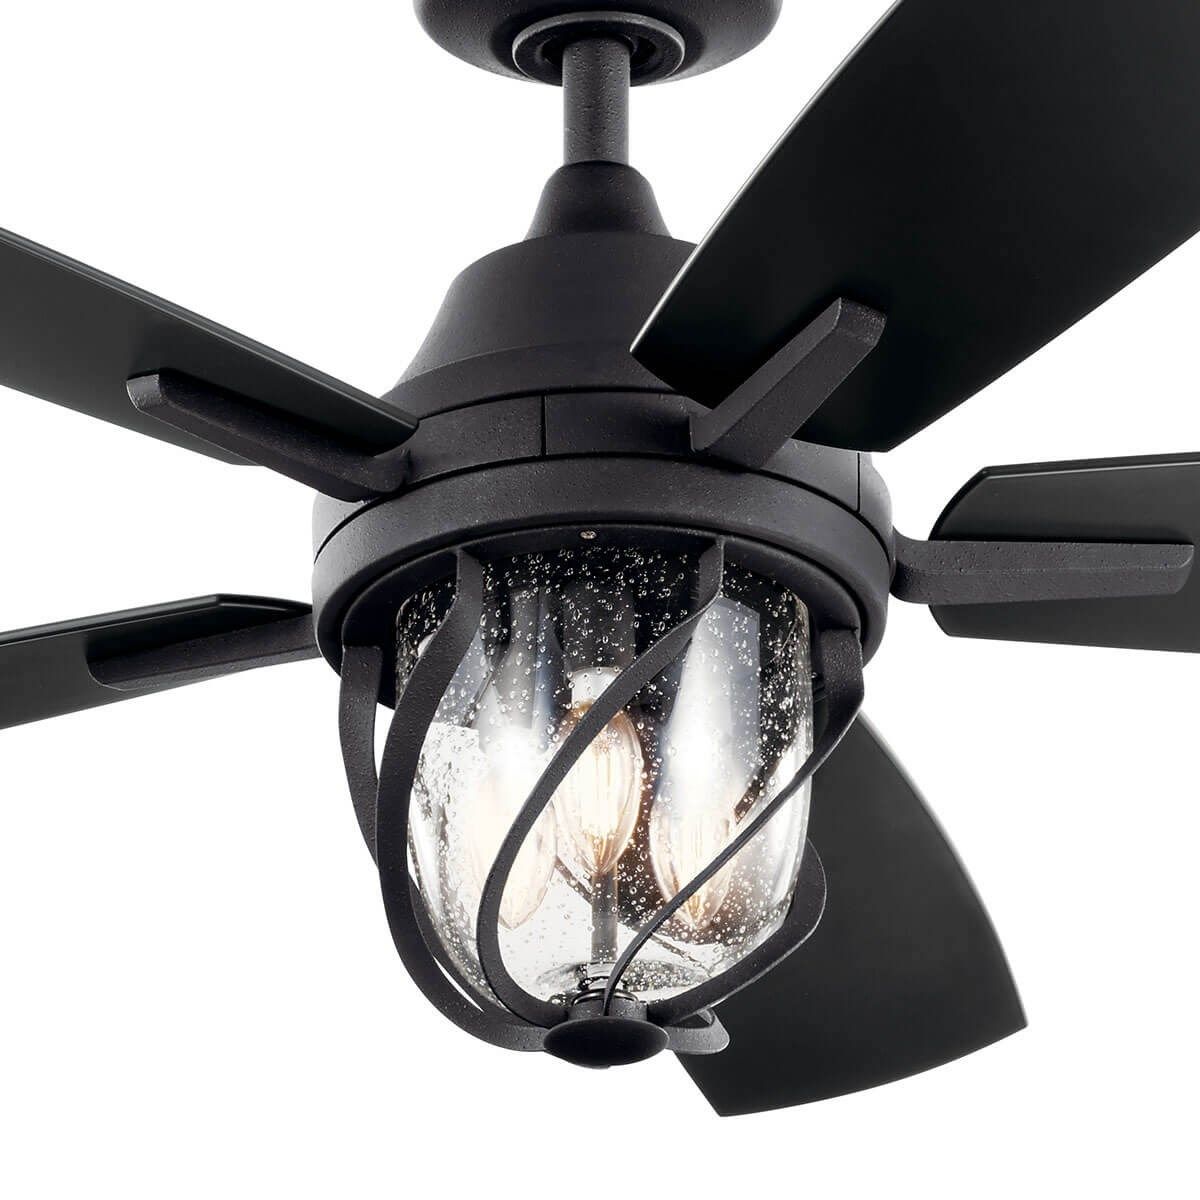 Lydra 52 Inch Rustic Caged Indoor/Outdoor Ceiling Fan With Light And Remote